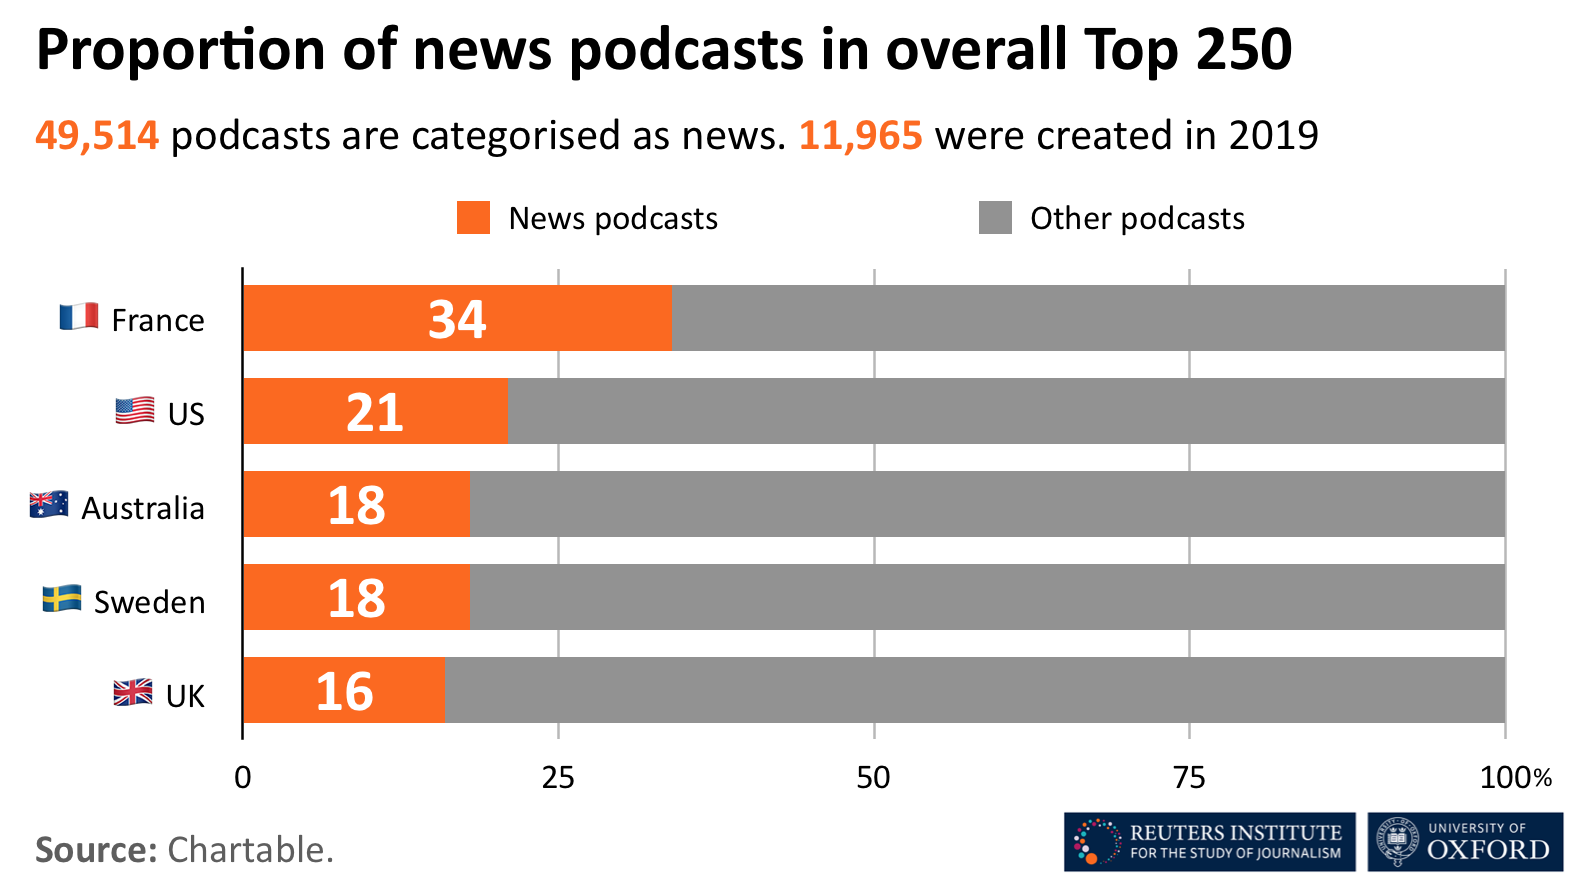 News podcasts